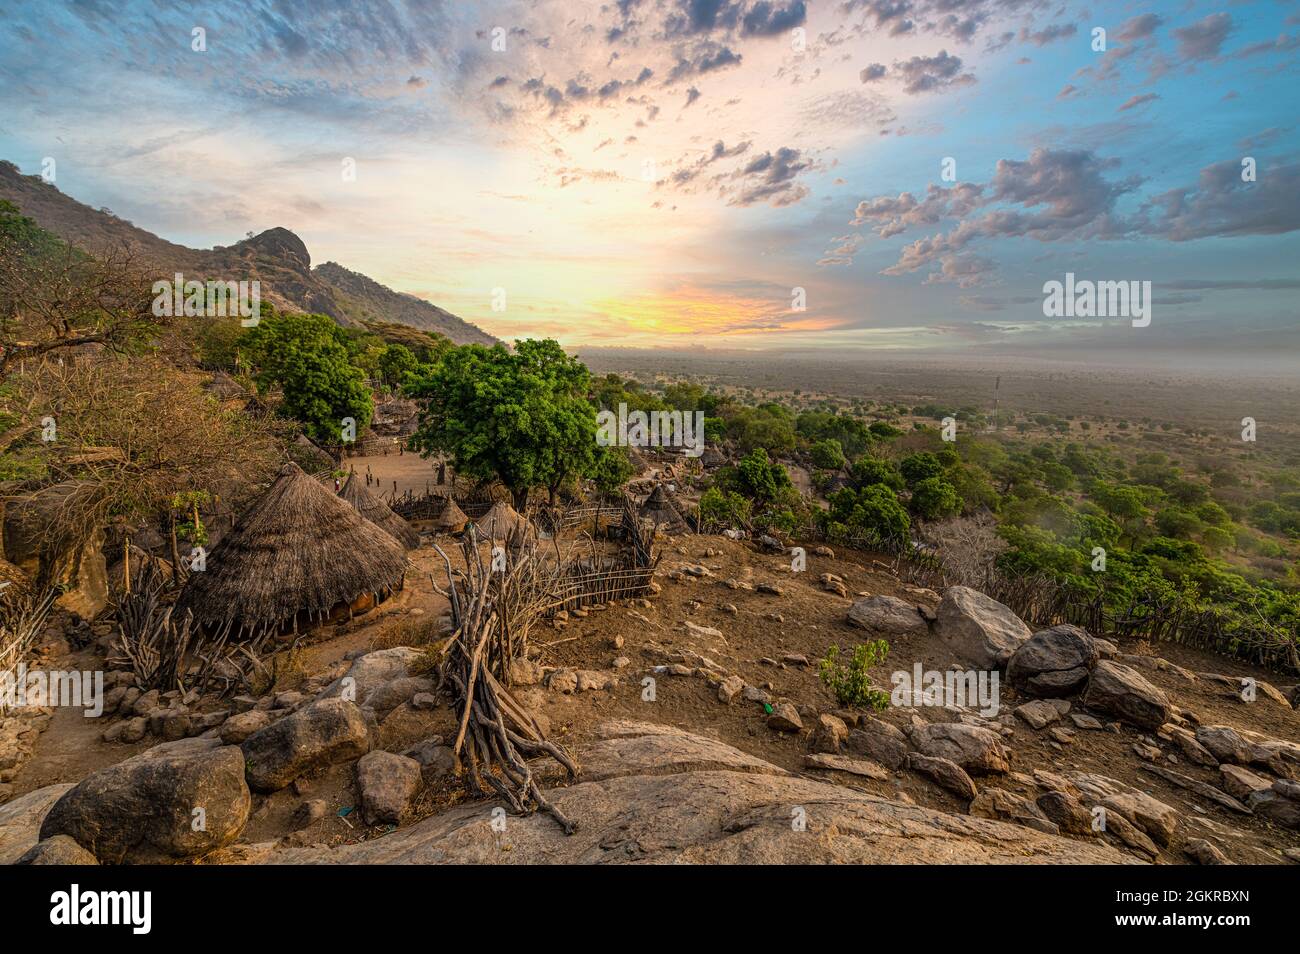 Sunset over traditional huts of the Otuho (Lotuko) tribe, Imatong mountains, Eastern Equatoria, South Sudan, Africa Stock Photo